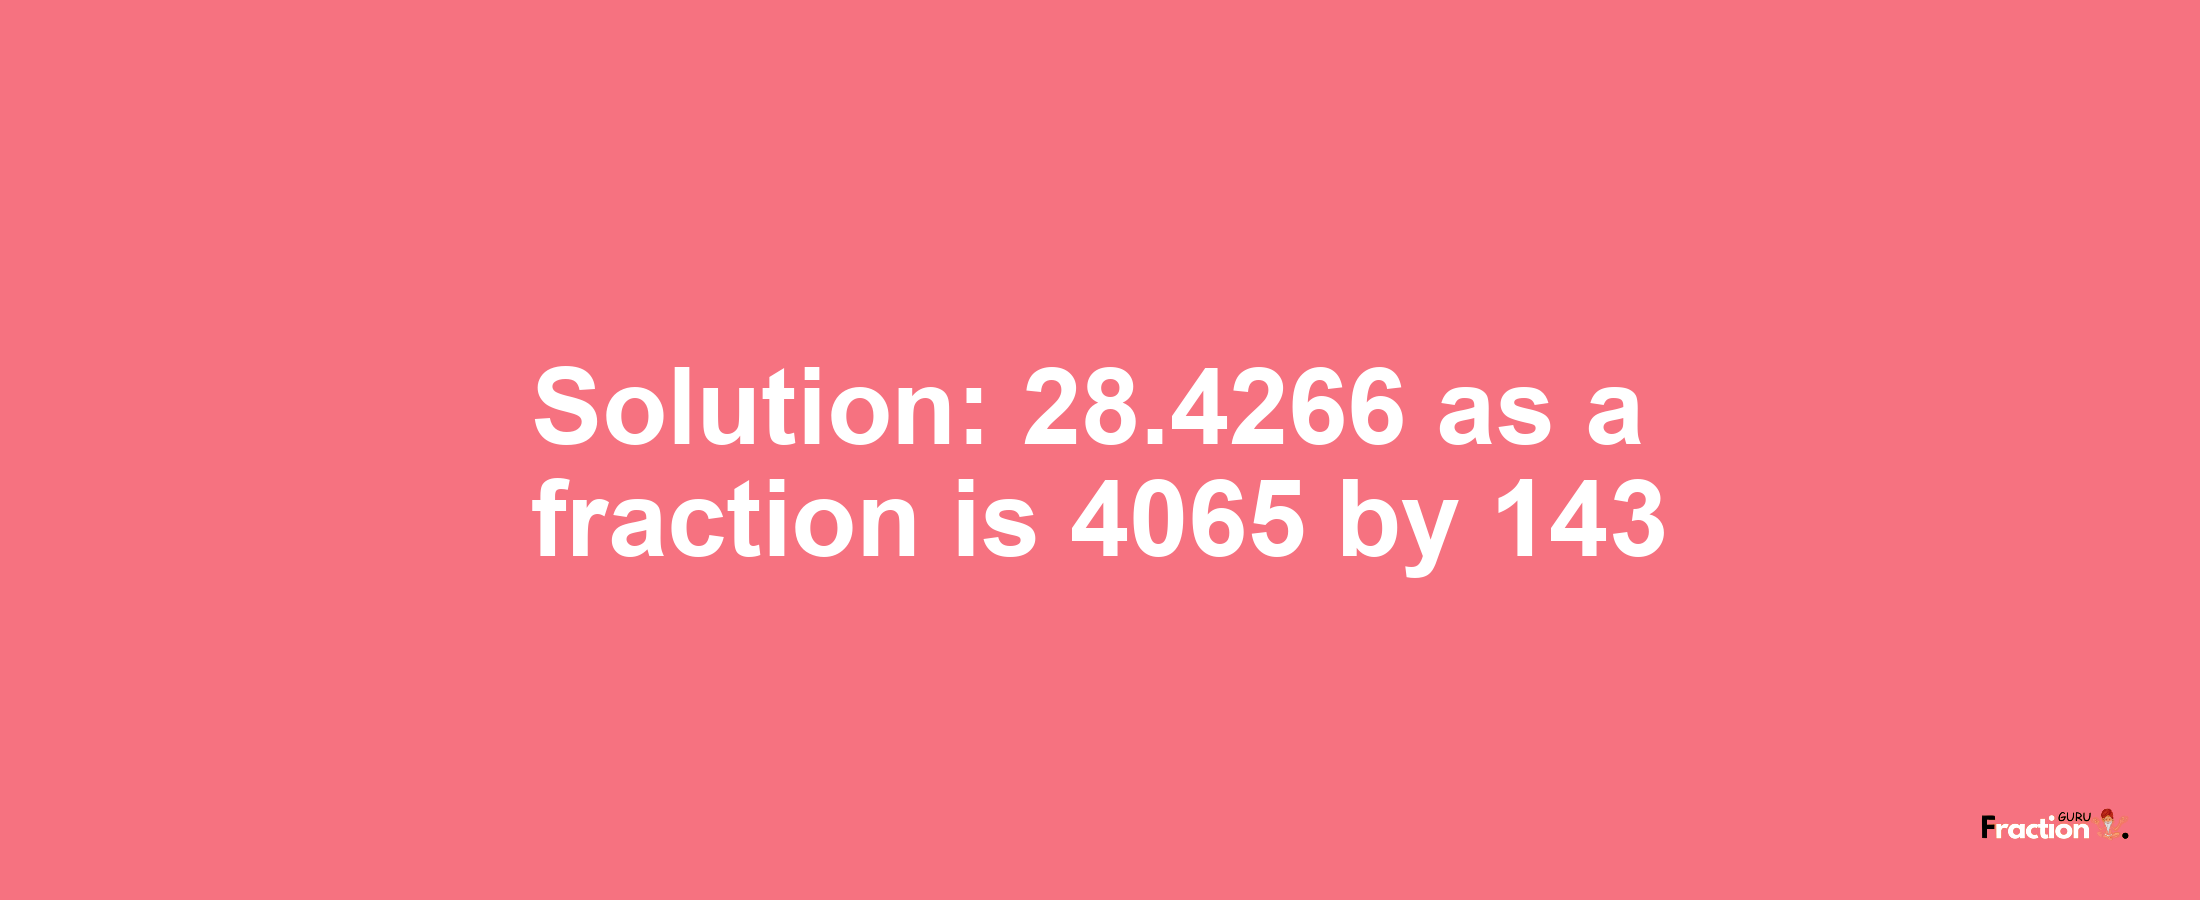 Solution:28.4266 as a fraction is 4065/143